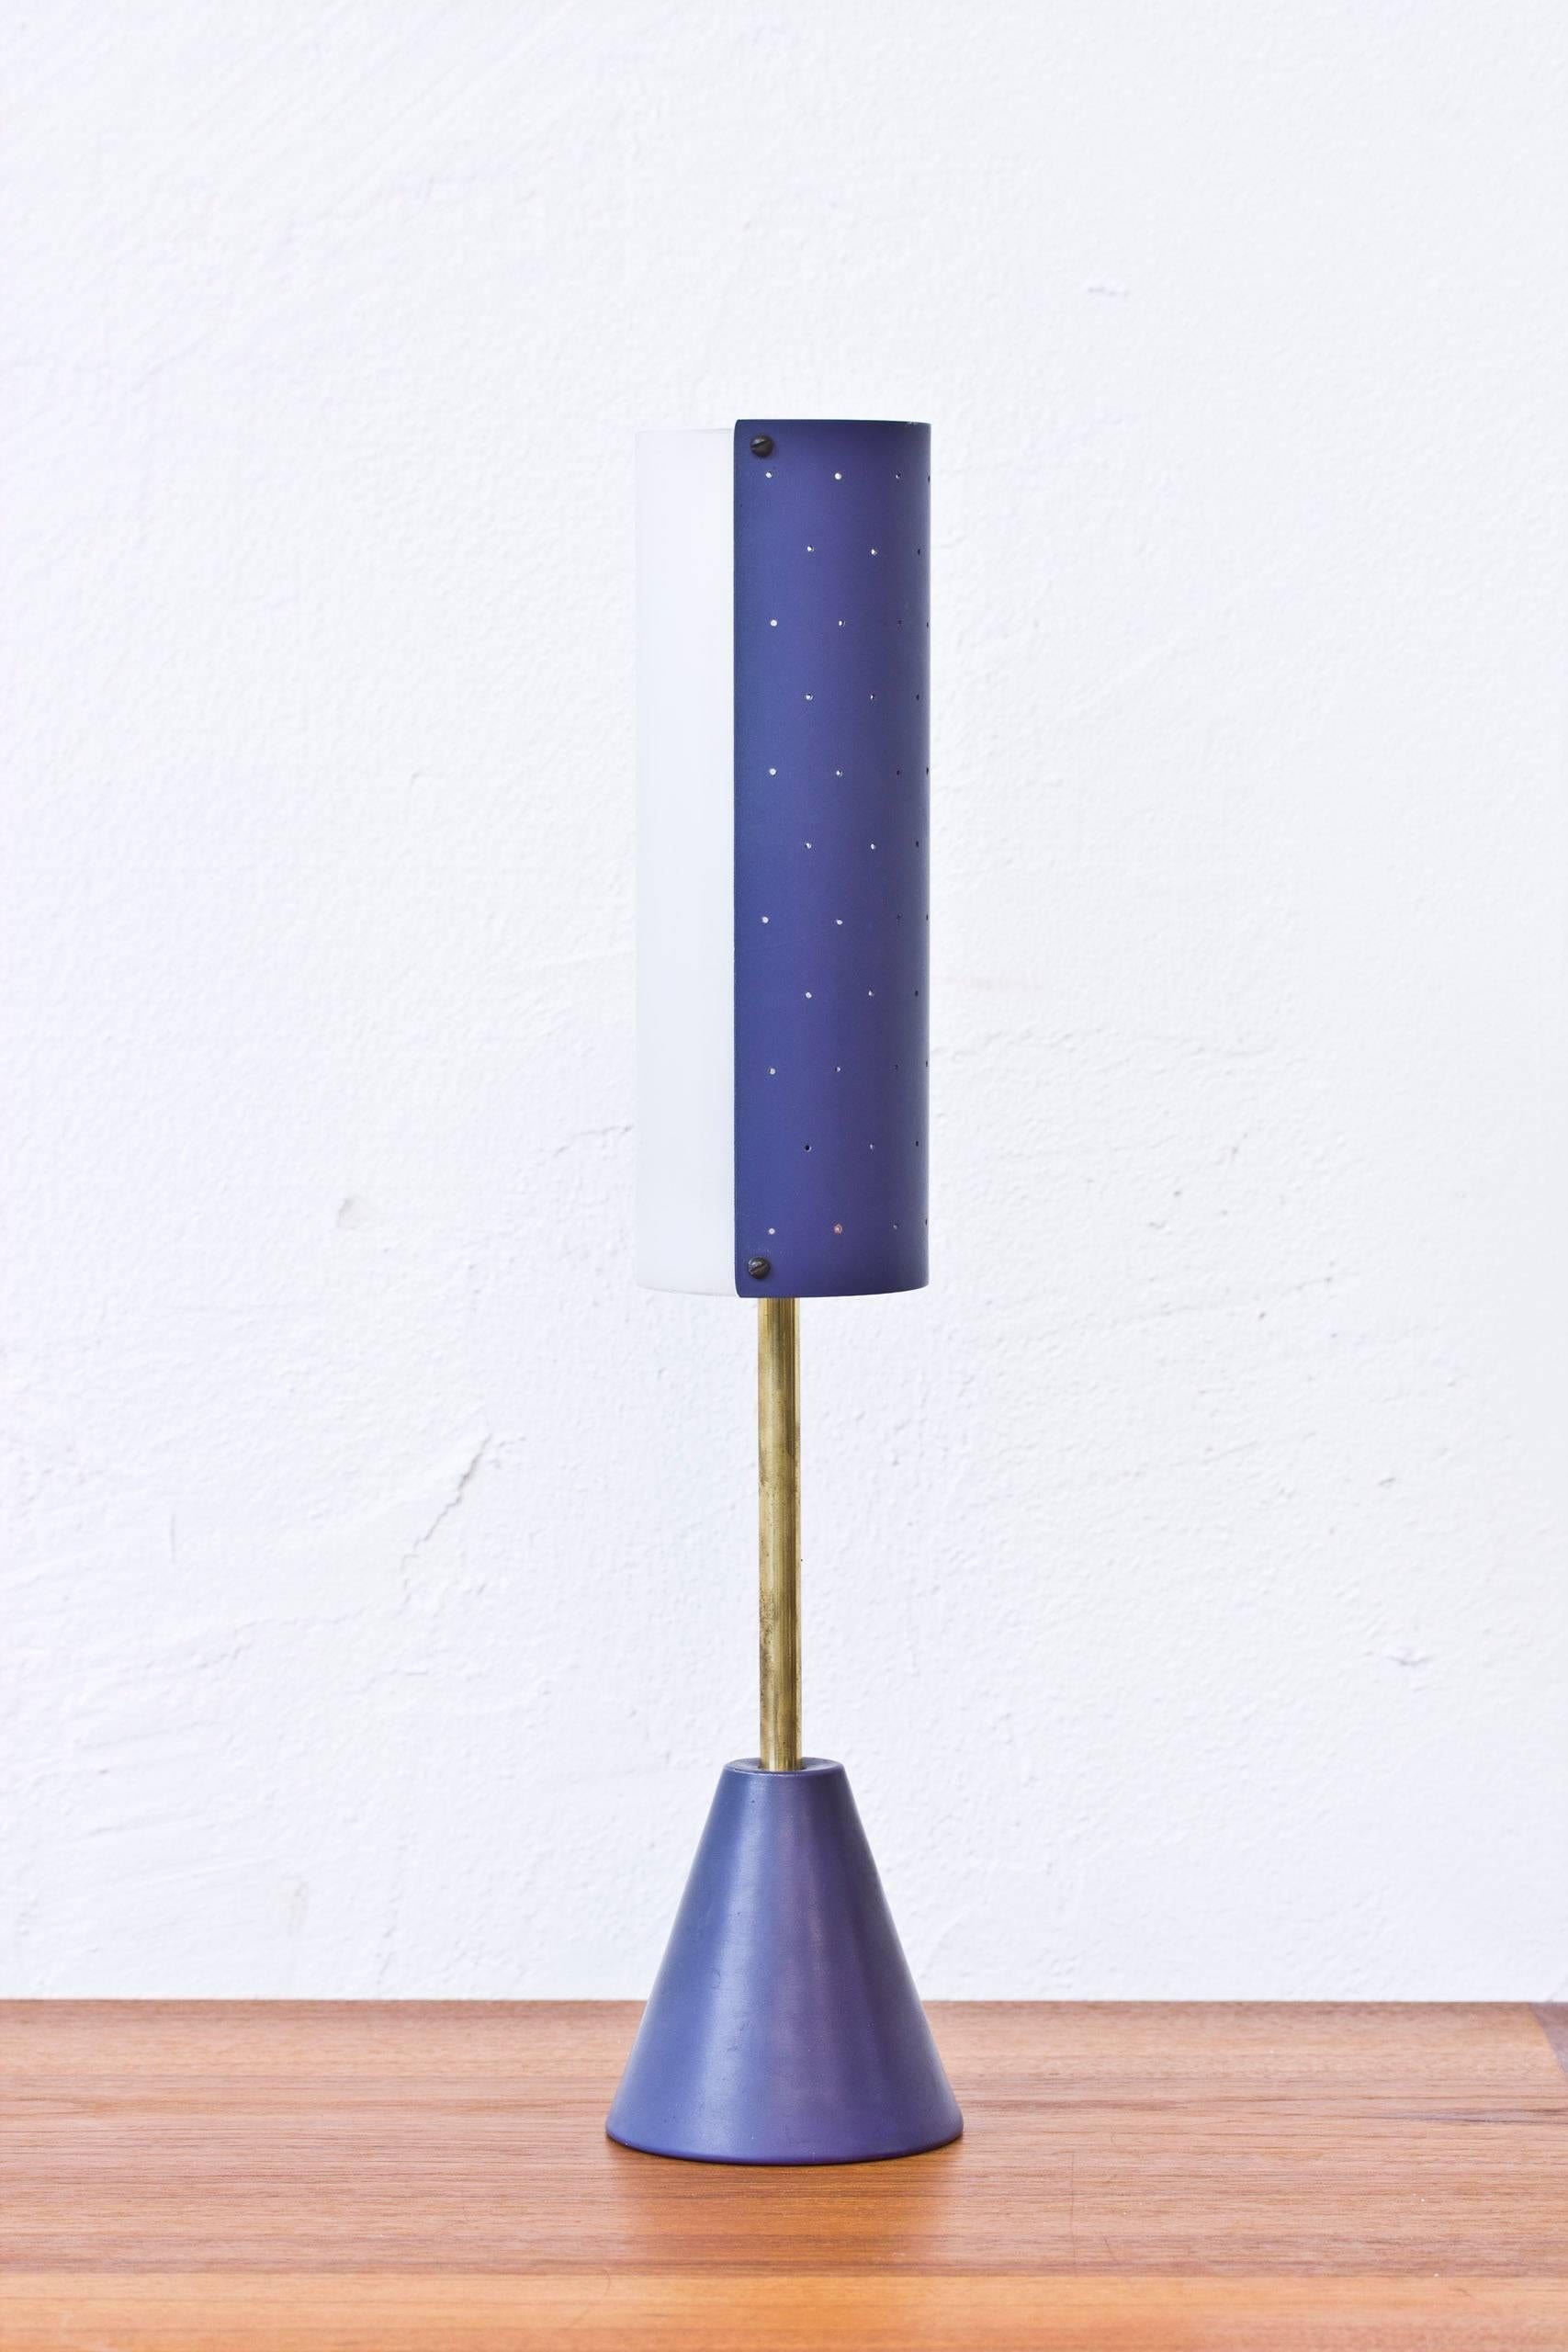 Brass, acrylic and blue lacquered metal lamp designed by Svend Aage Holm Sorensen. Produced by ASEA in the 1950s. Very good original condition. Light switch on chord.